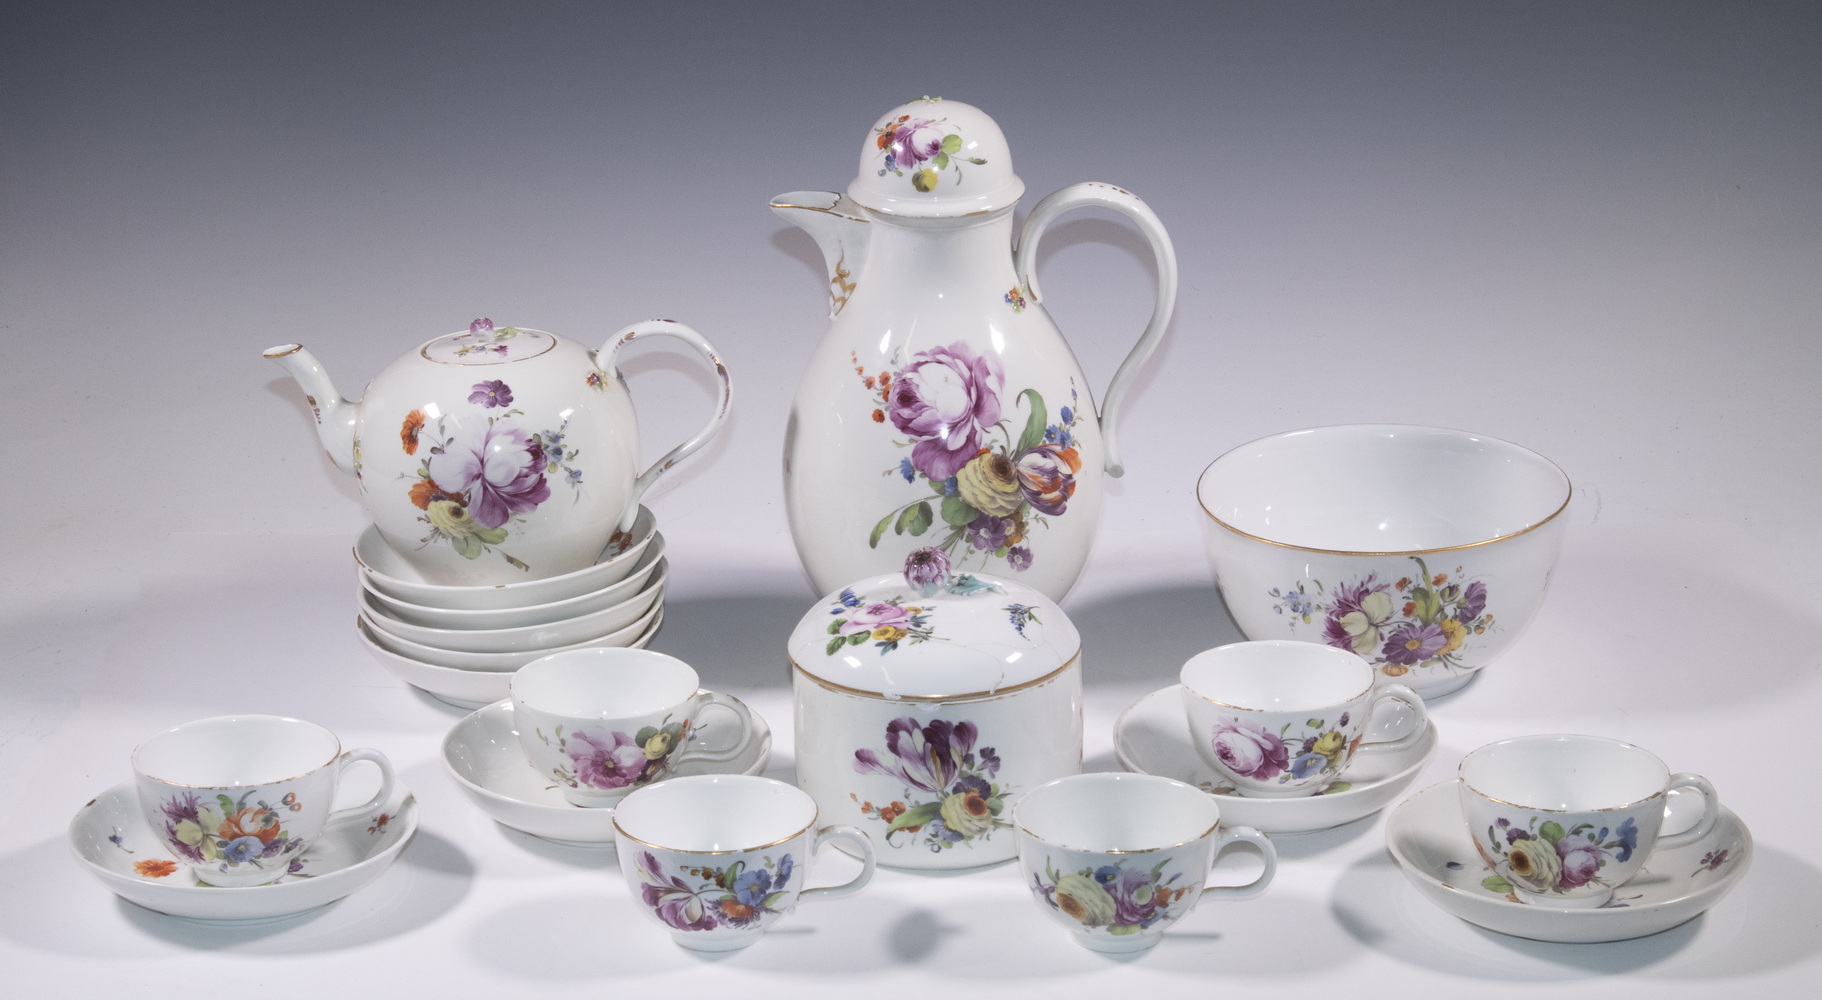 THE HAGUE DECORATED ANSBACH PORCELAIN